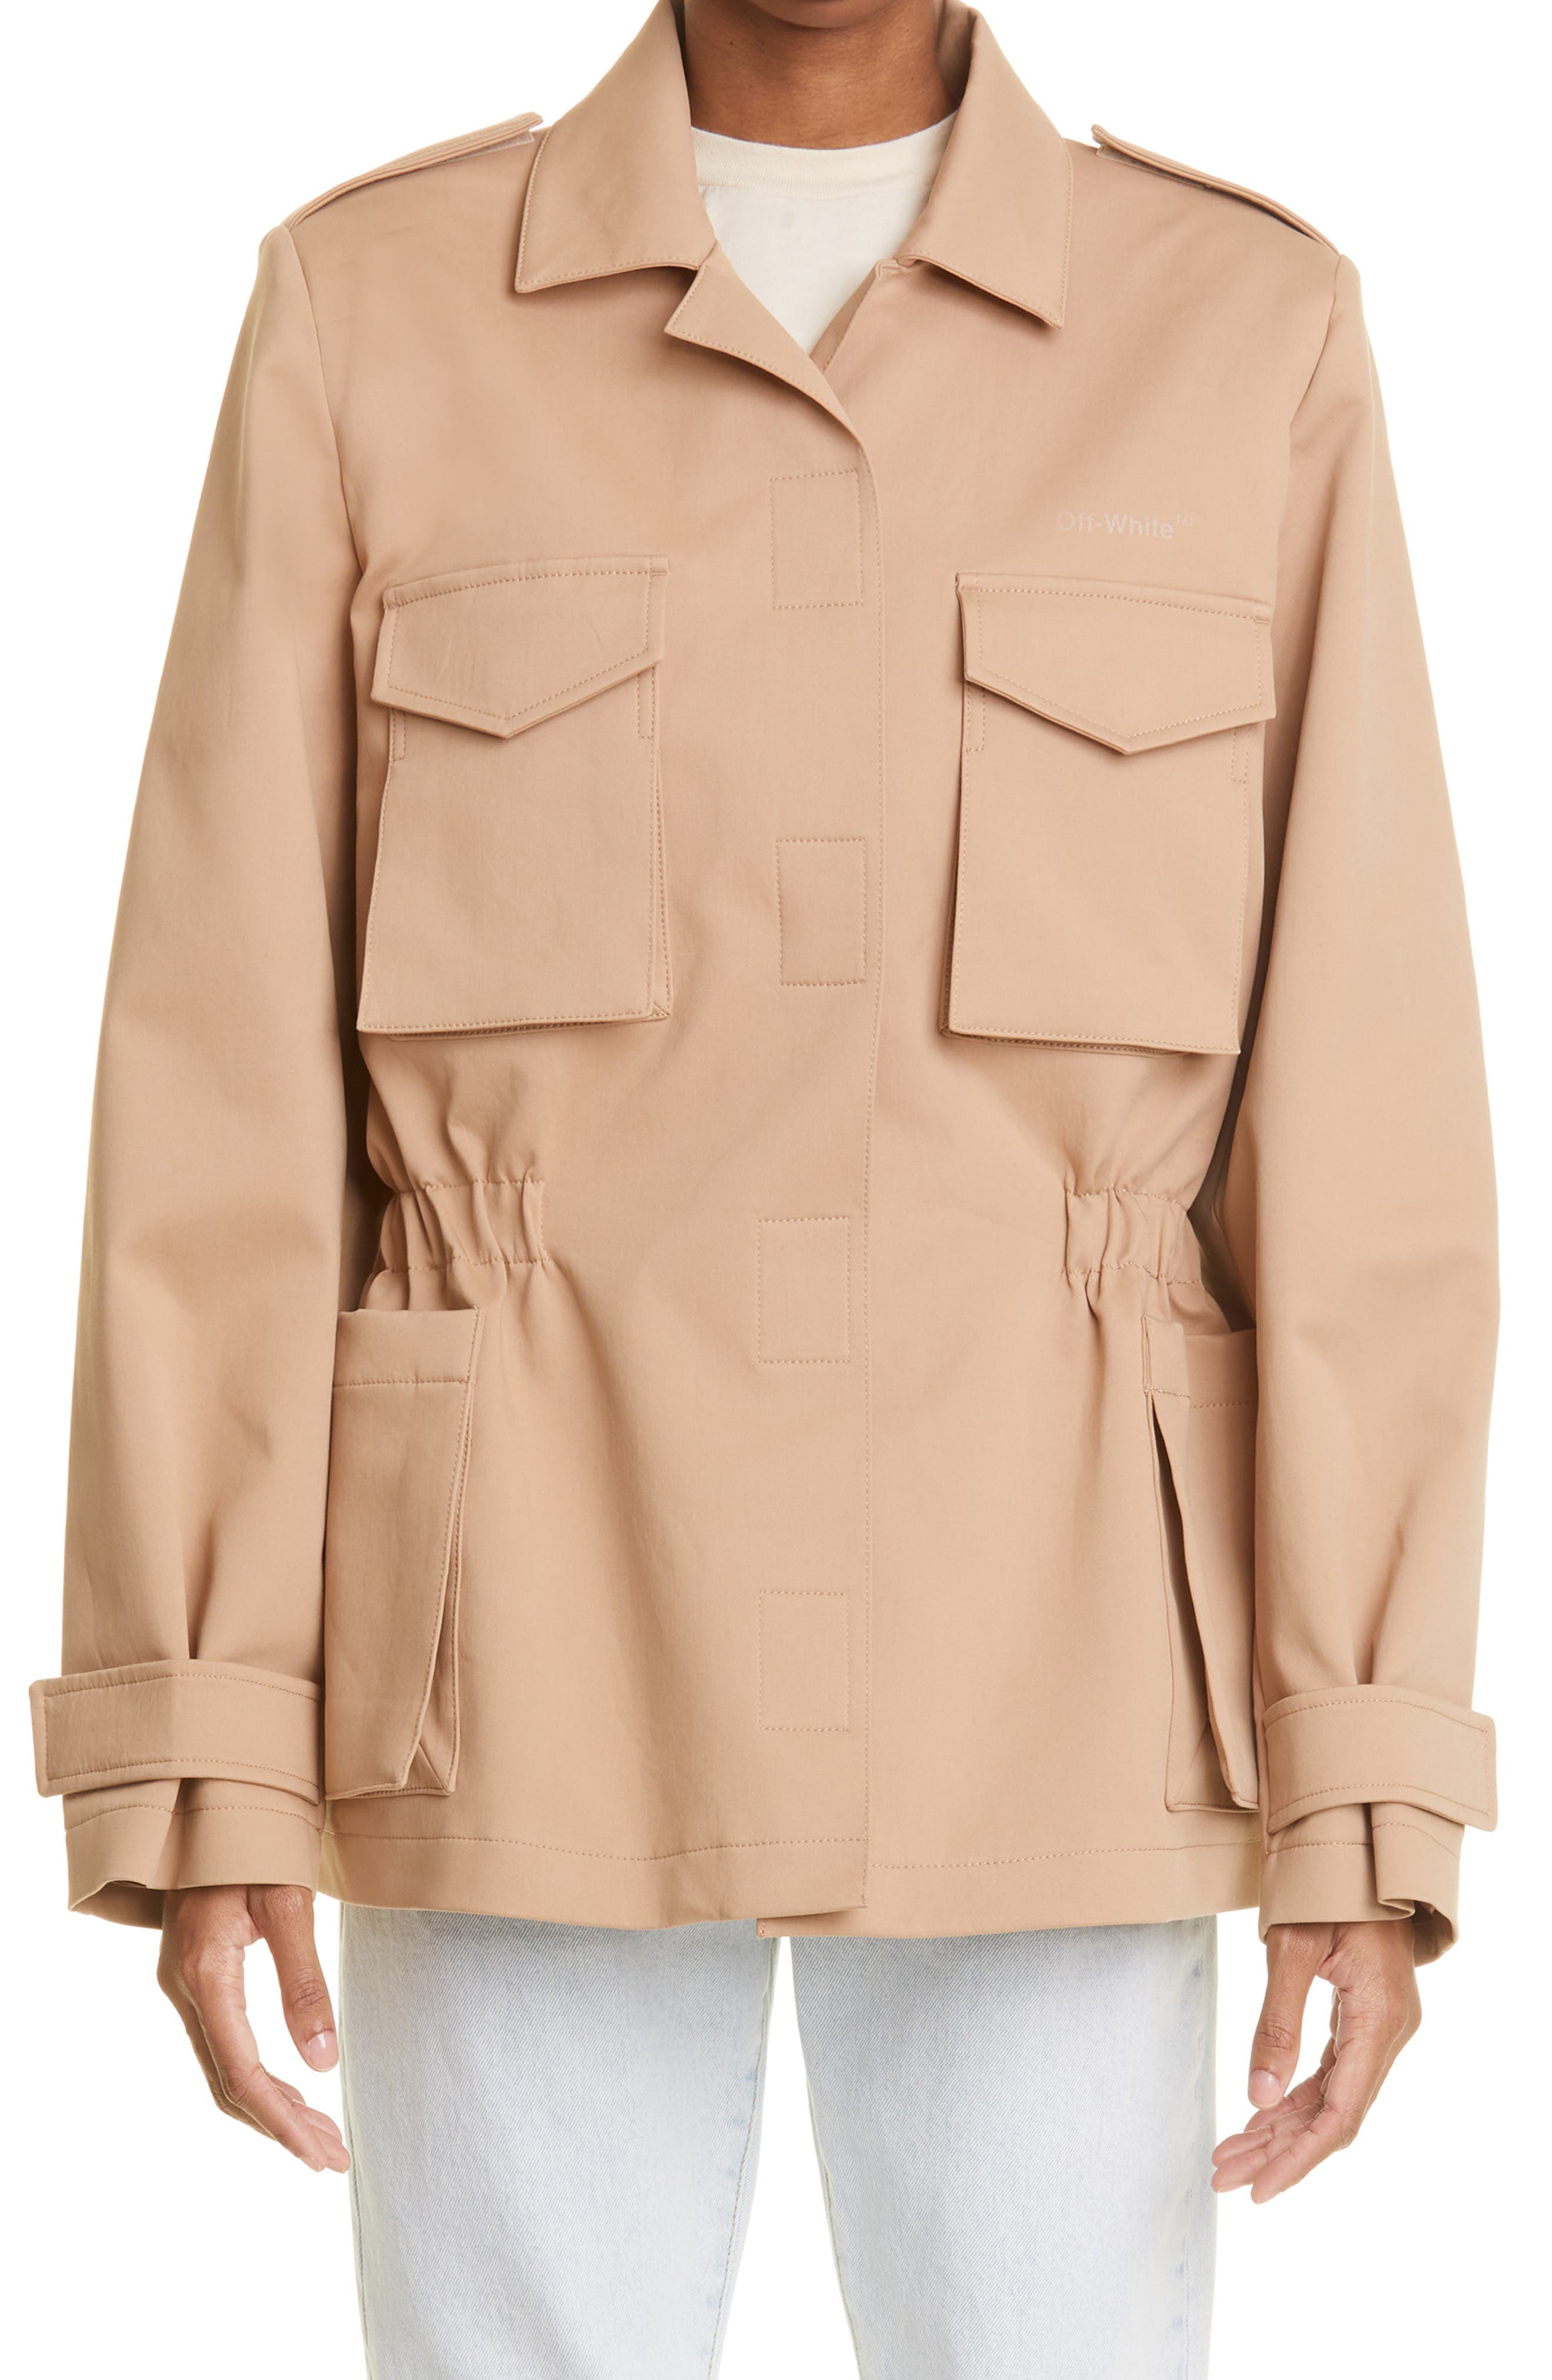 Off-White Diagonal Stripe Stretch Cotton Field Jacket in Camel at Nordstrom